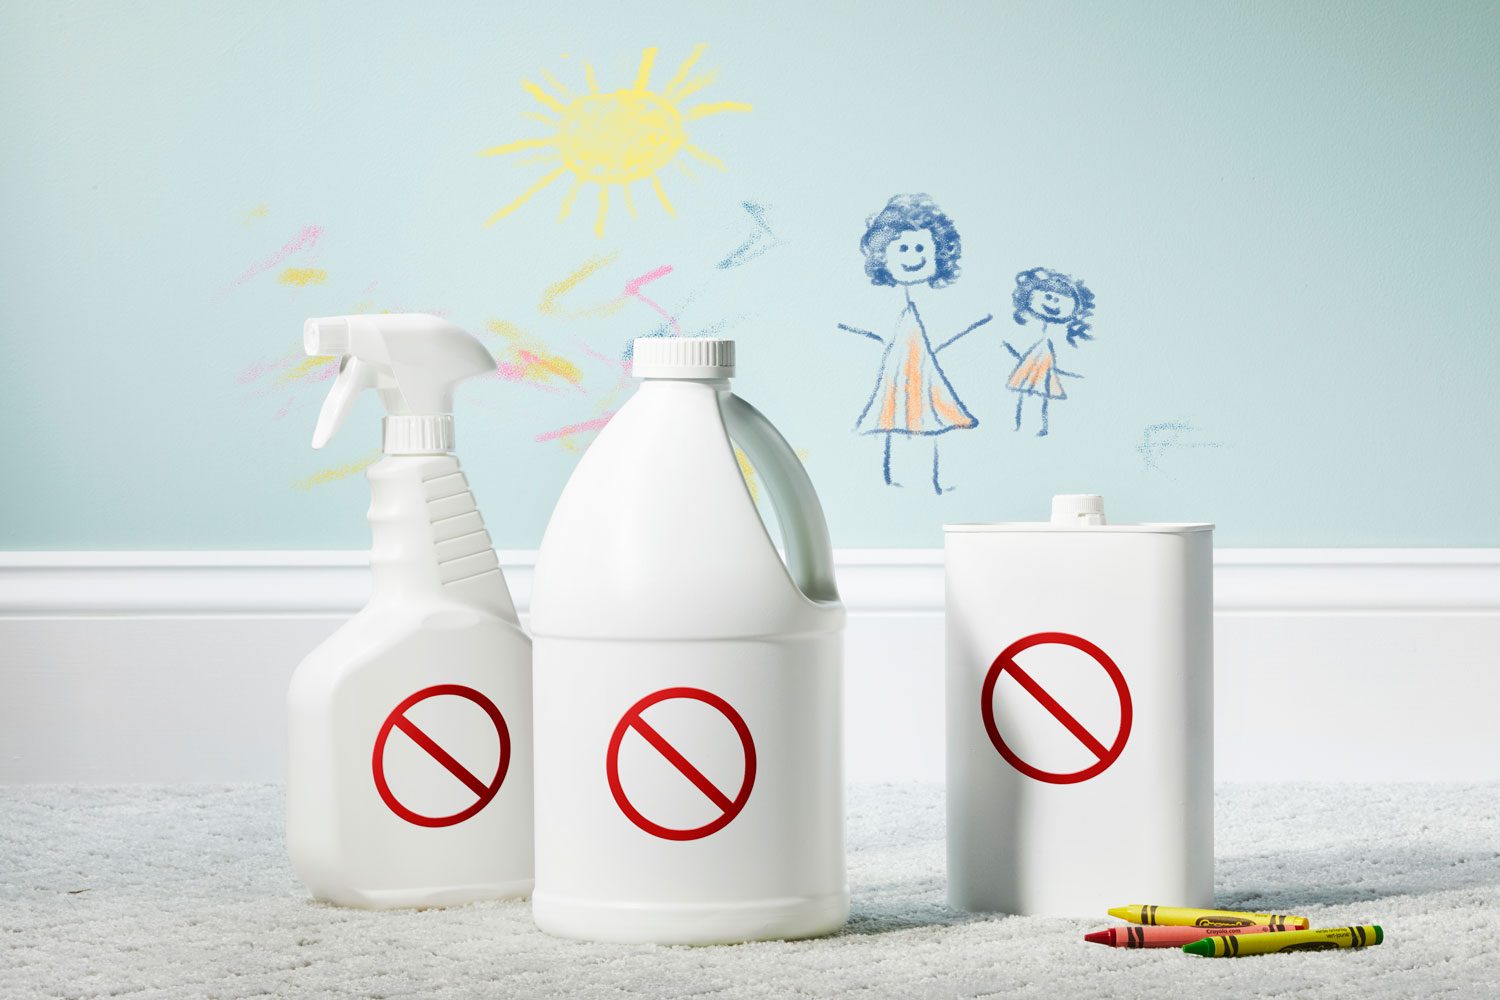 three all-white cleaning supplies bottles with "no" signs on floor in front of crayon markings on wall